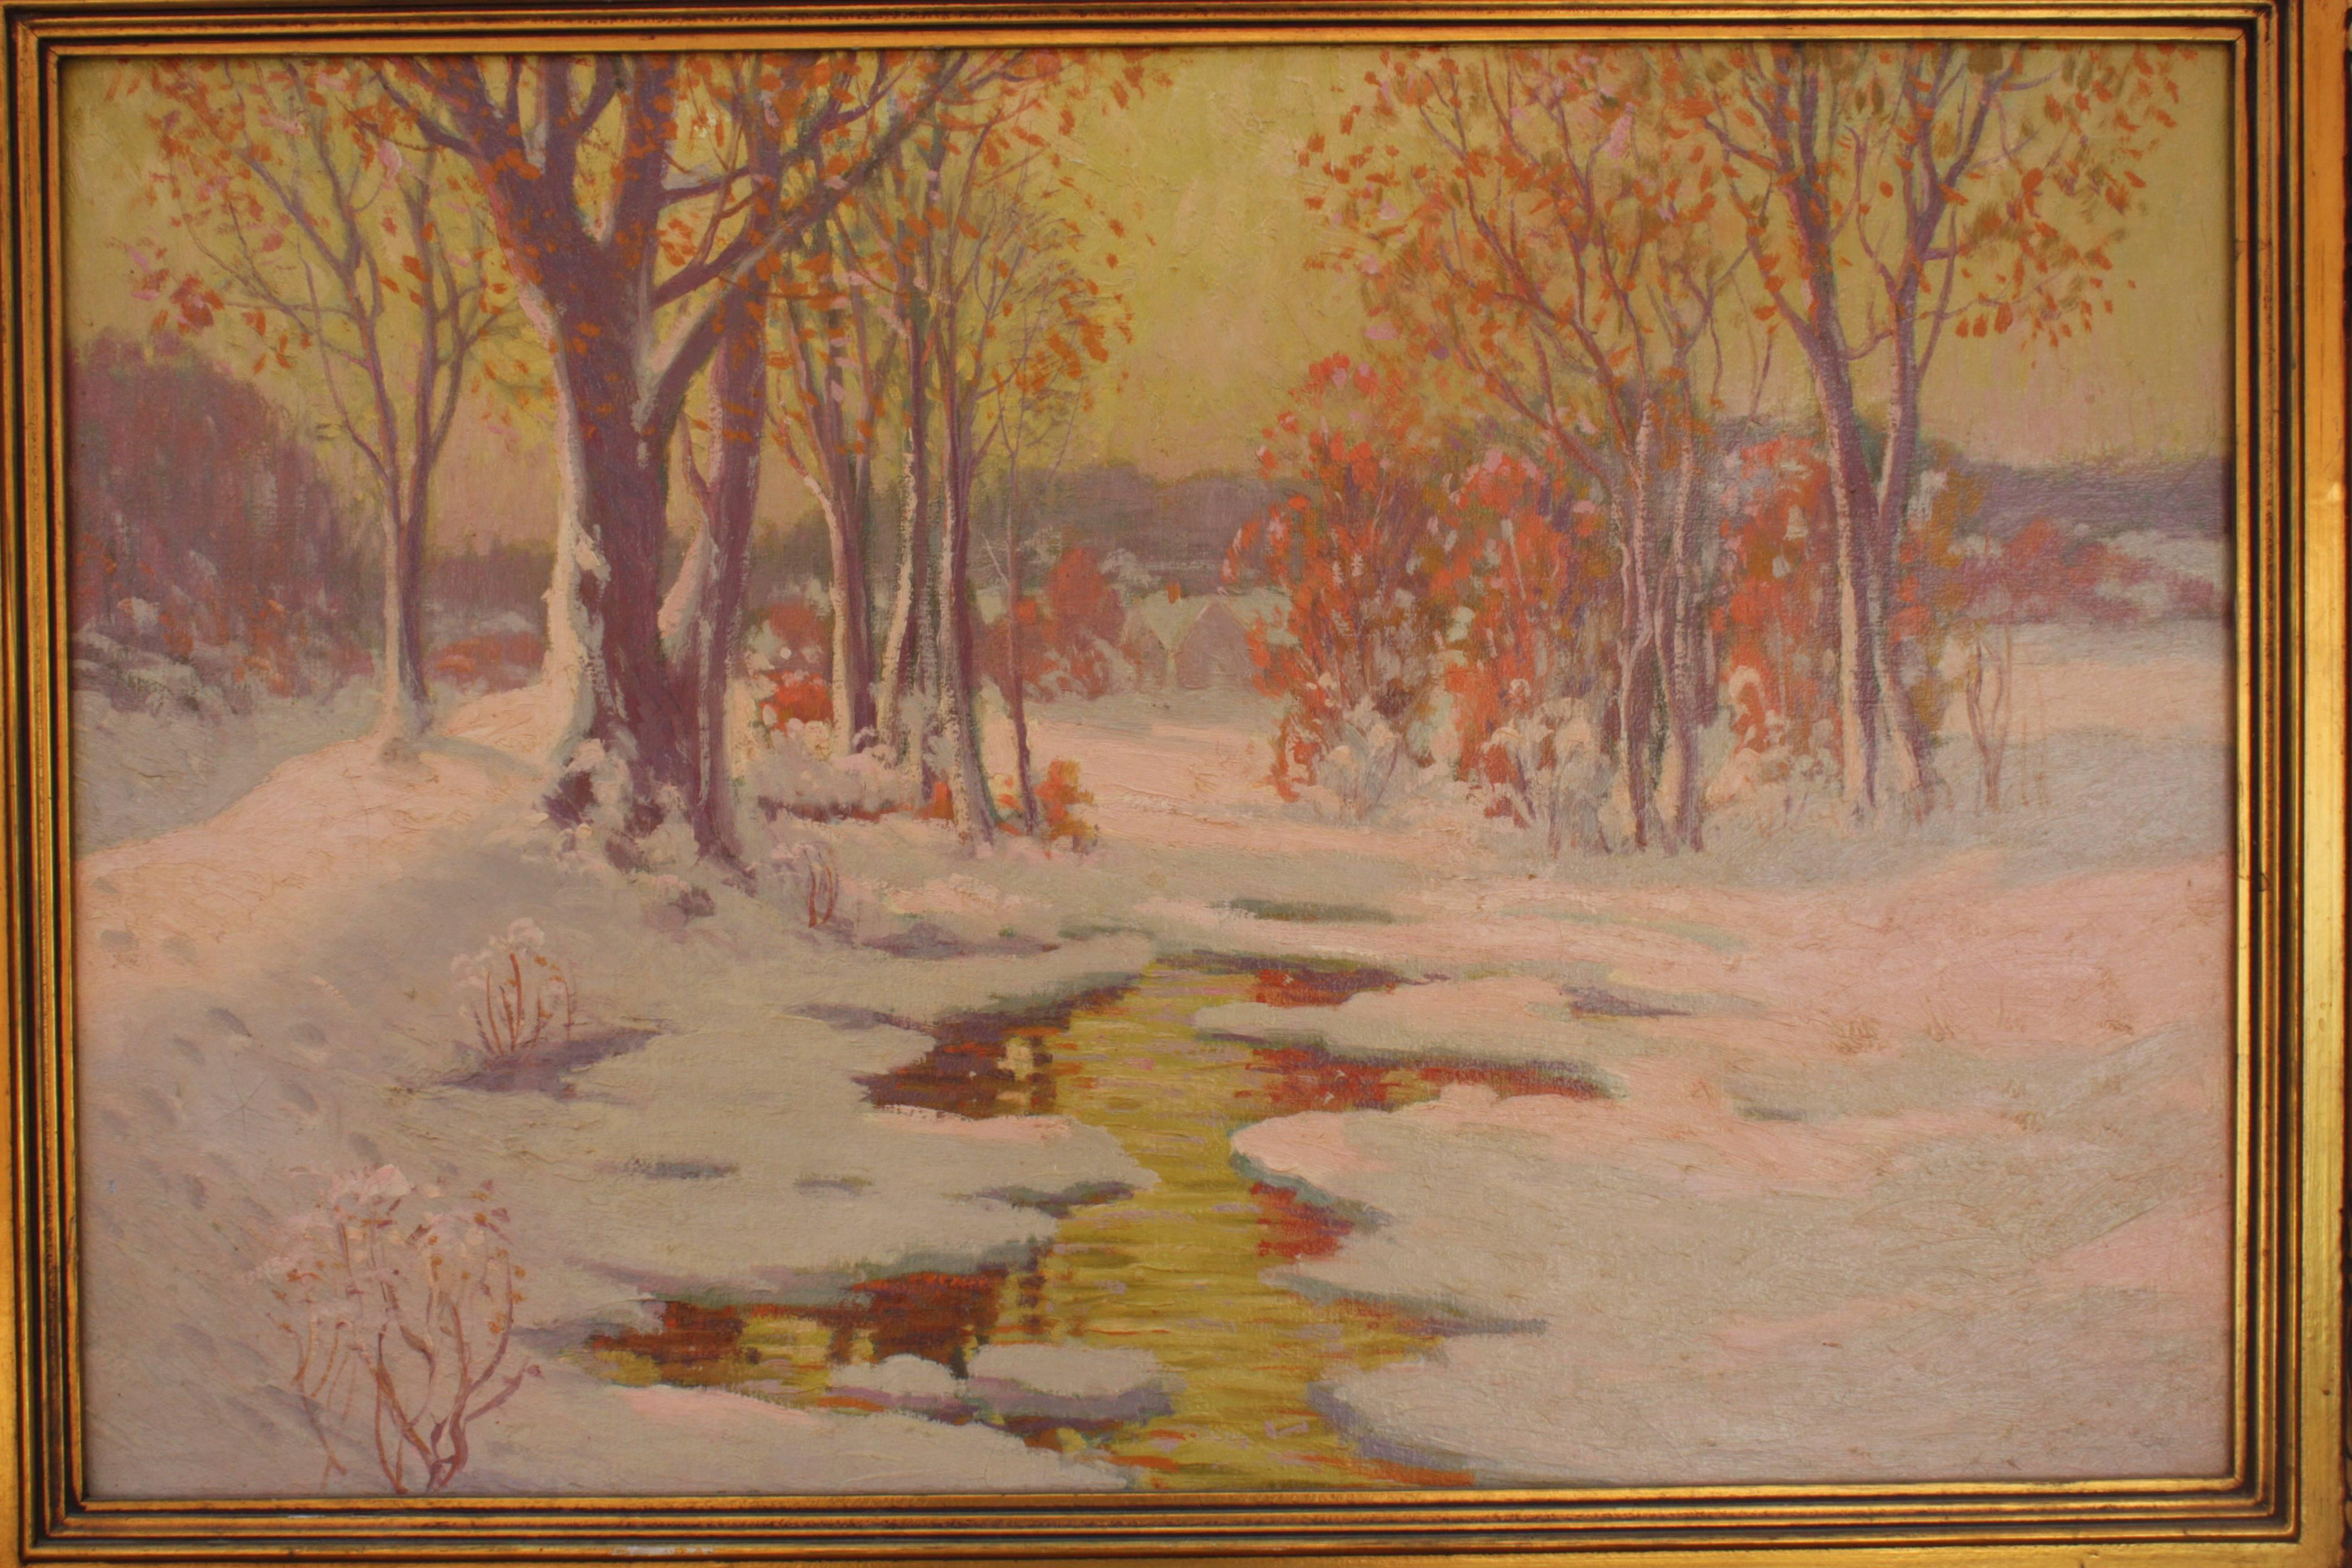 Attractive turn of the century snowscape in gilt frame. Unsigned painting on canvas. Painting was relined at one point. Canvas size is 20.25 T x 29.75 W 25